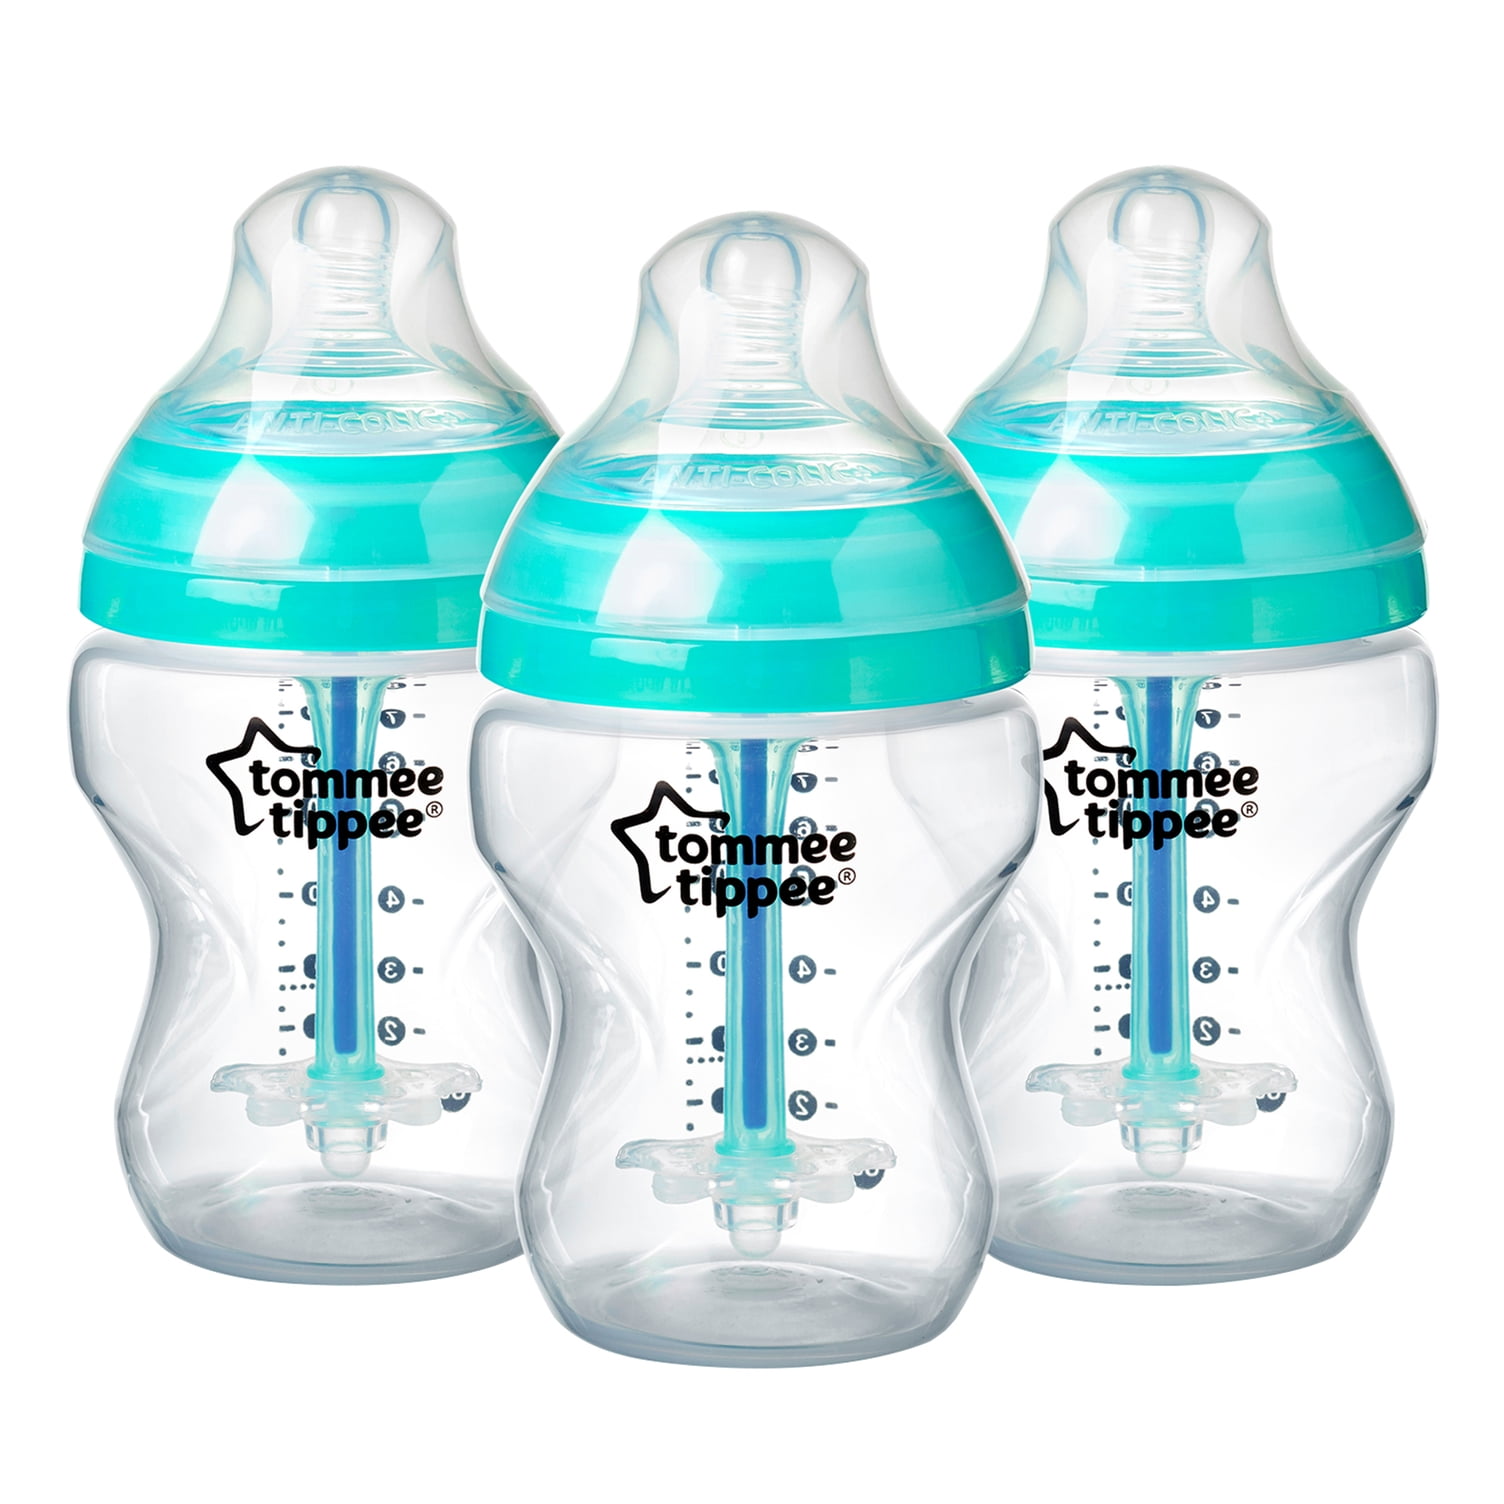 Tommee Tippee Anti-Colic Baby Bottles, Slow Flow Breast-Like Nipple and  Unique Anti-Colic Venting System (9oz, 2 Count) 